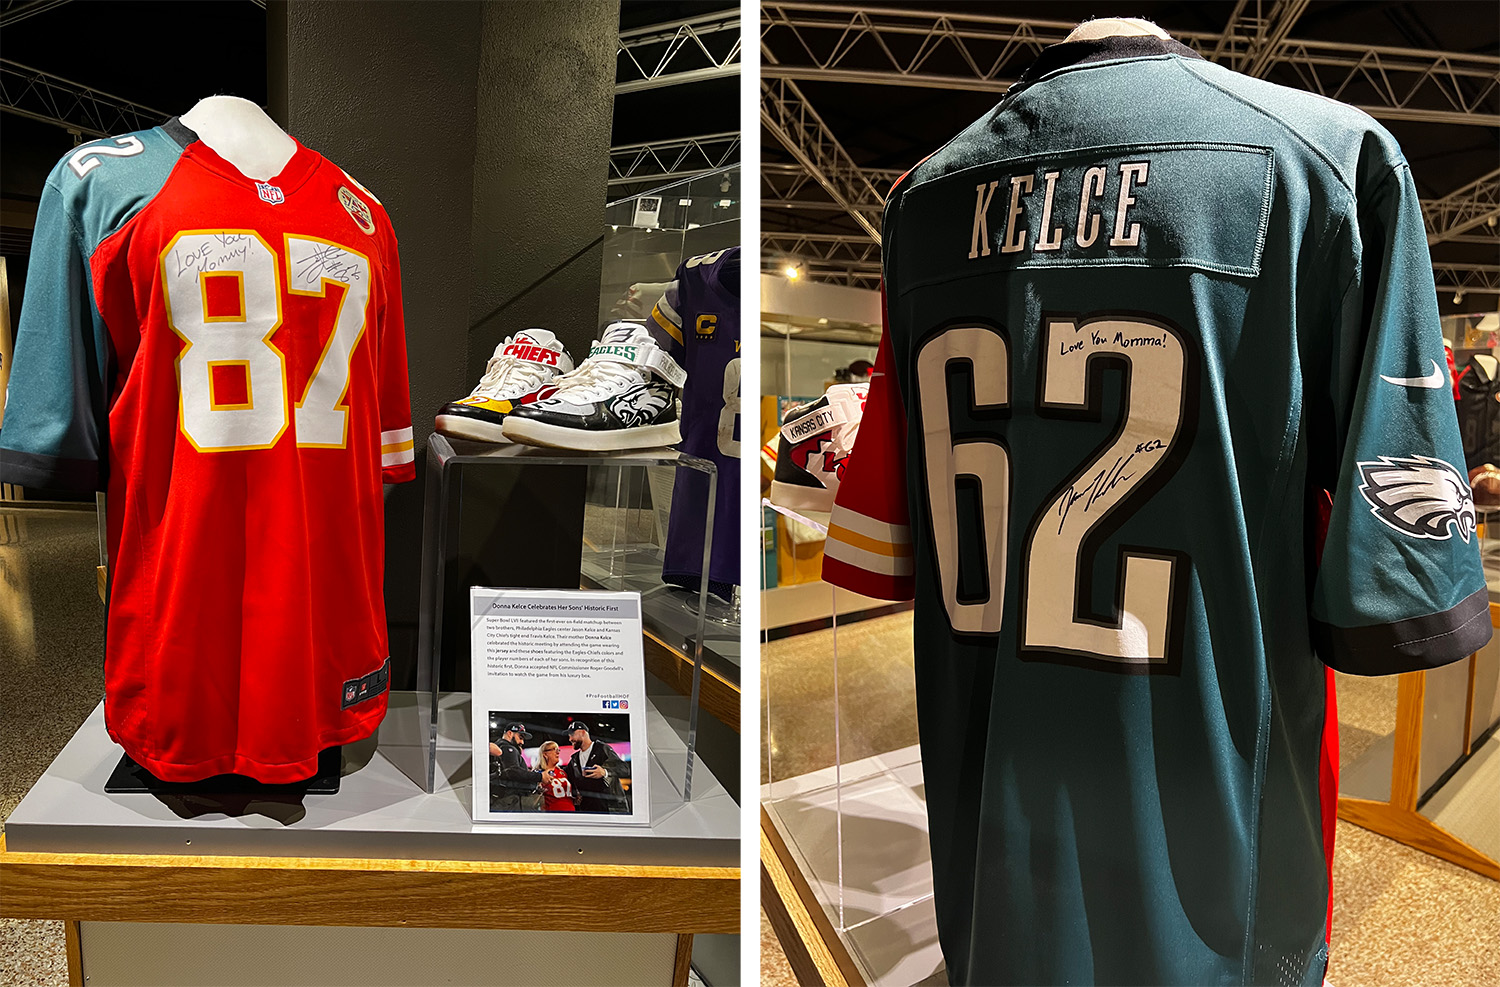 When the Kansas City Chiefs and Philadelphia Eagles advanced to Super Bowl LVII, there was a much deeper meaning to the game for Donna Kelce, who is shown in this image.